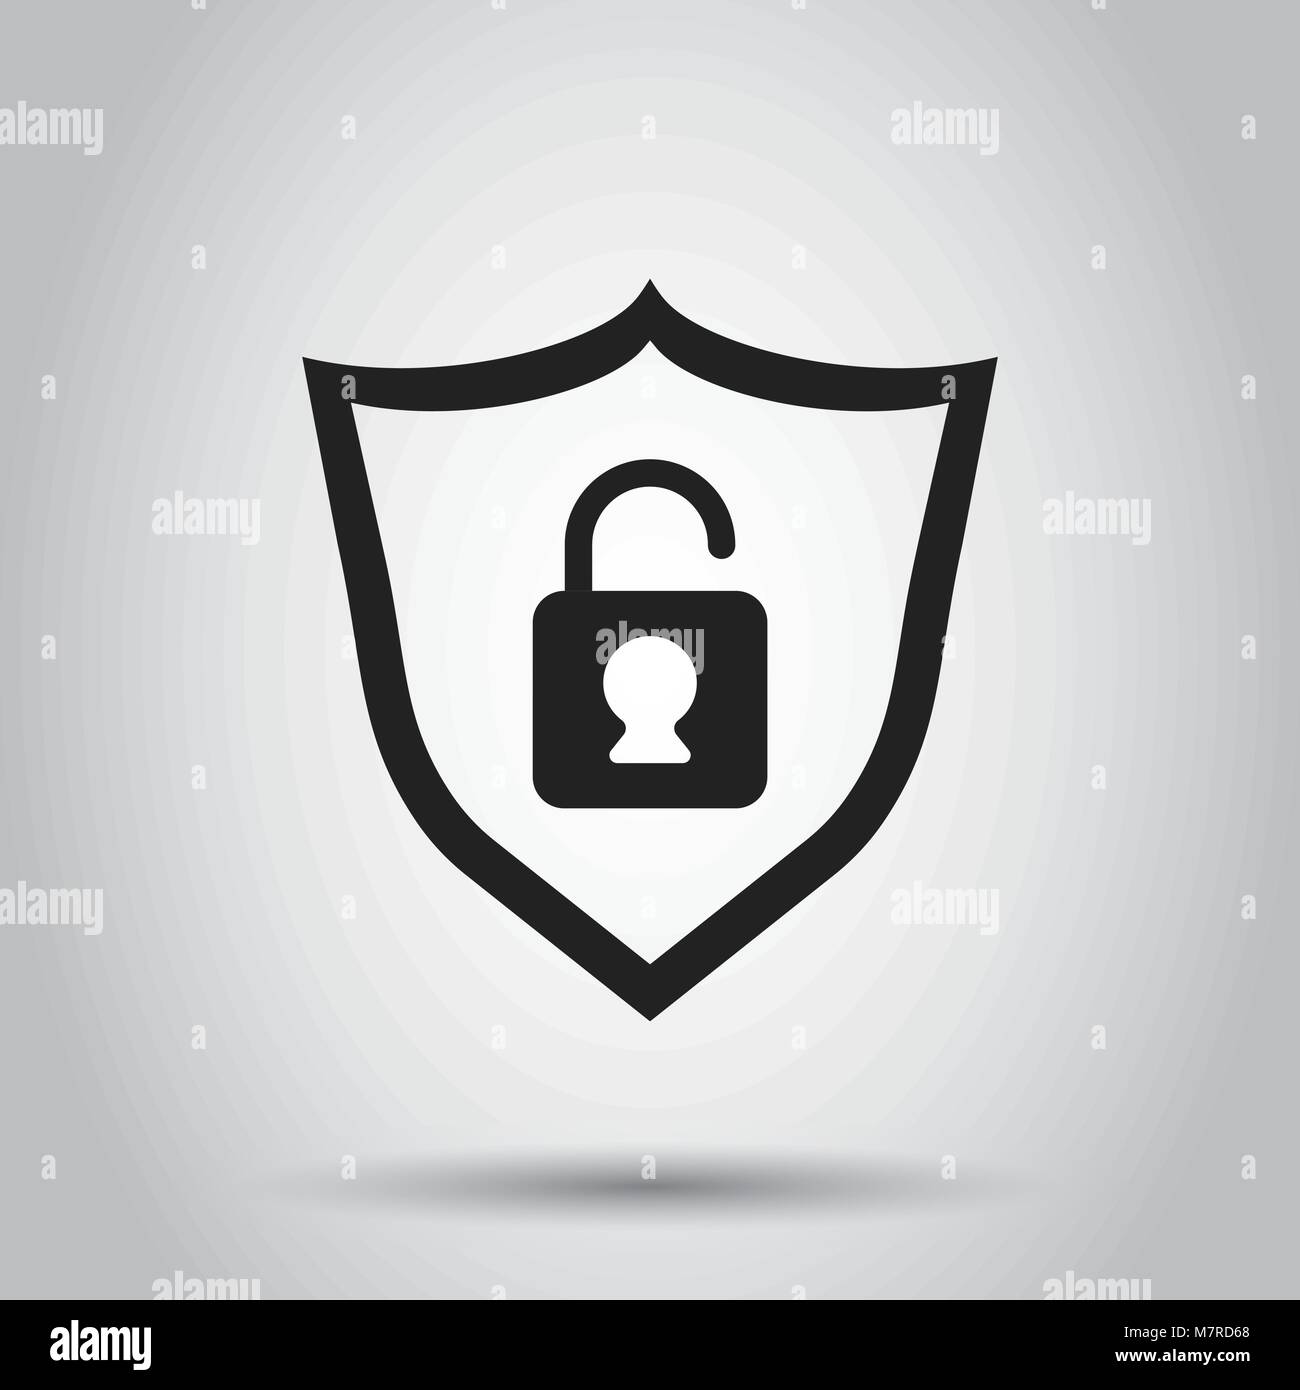 Lock with shield security icon. Vector illustration on white background. Business concept padlock pictogram. Stock Vector